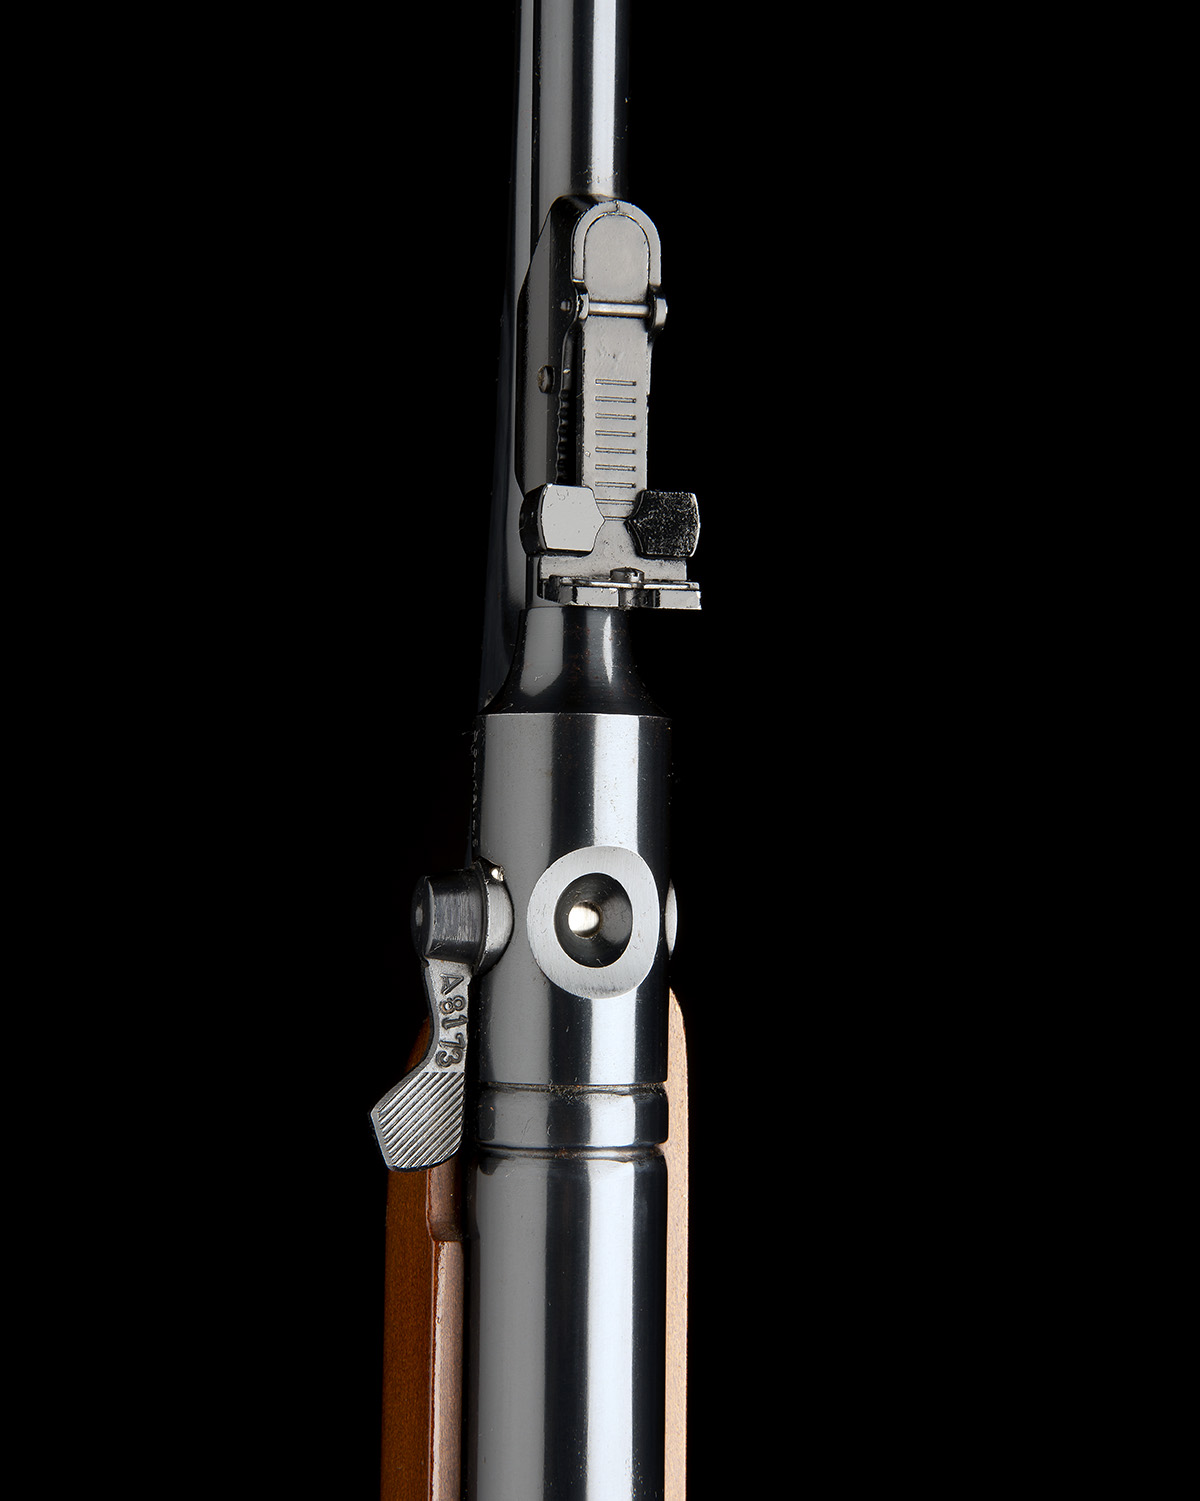 BSF, GERMANY A SCARCE BOXED .177 UNDER-LEVER AIR-RIFLE, MODEL 'S54 STANDARD', serial no. A8173 circa - Image 5 of 7